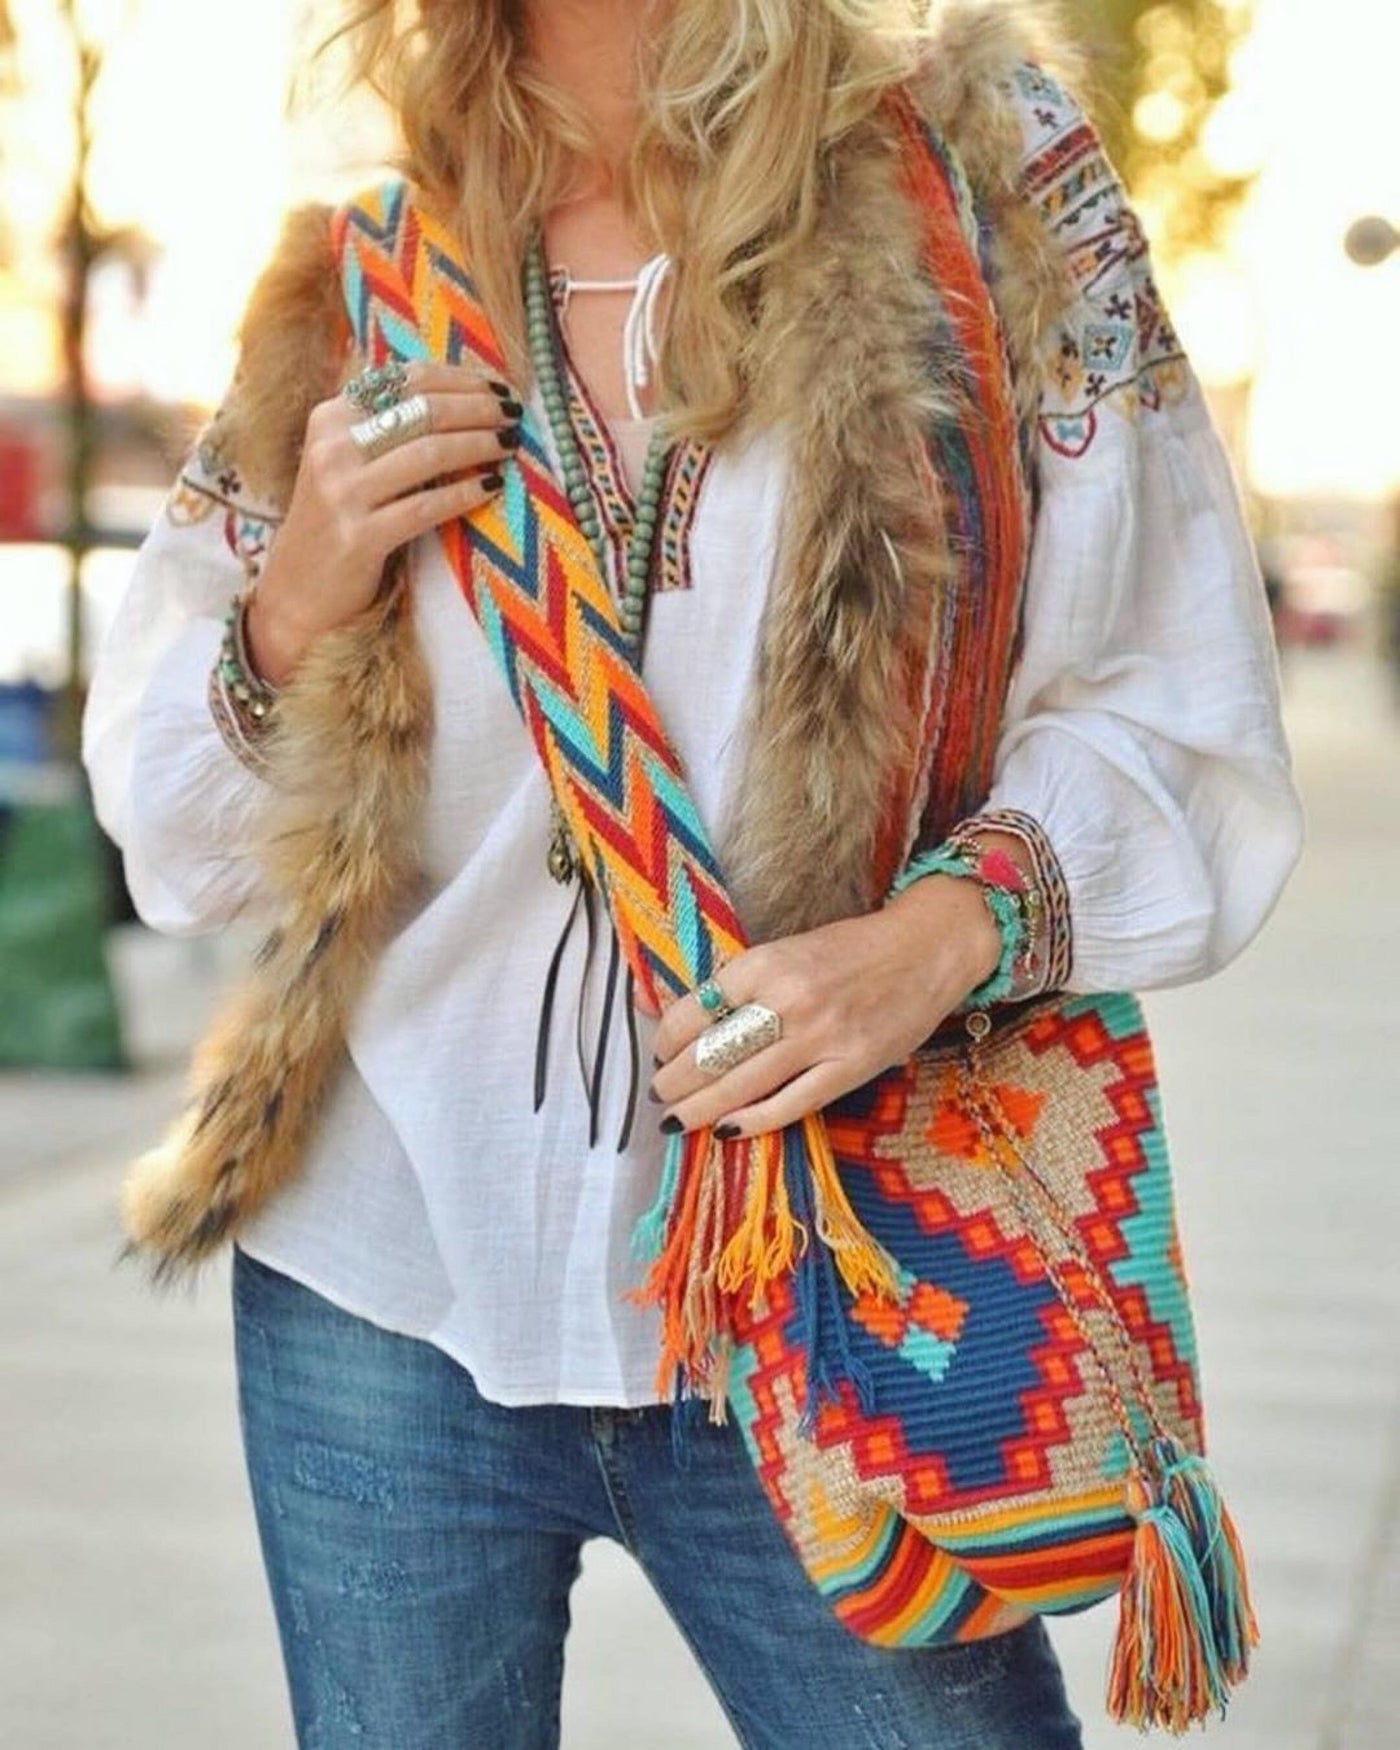 The Austin Bag Large Multicolor with Beads — Classic Boho Bags